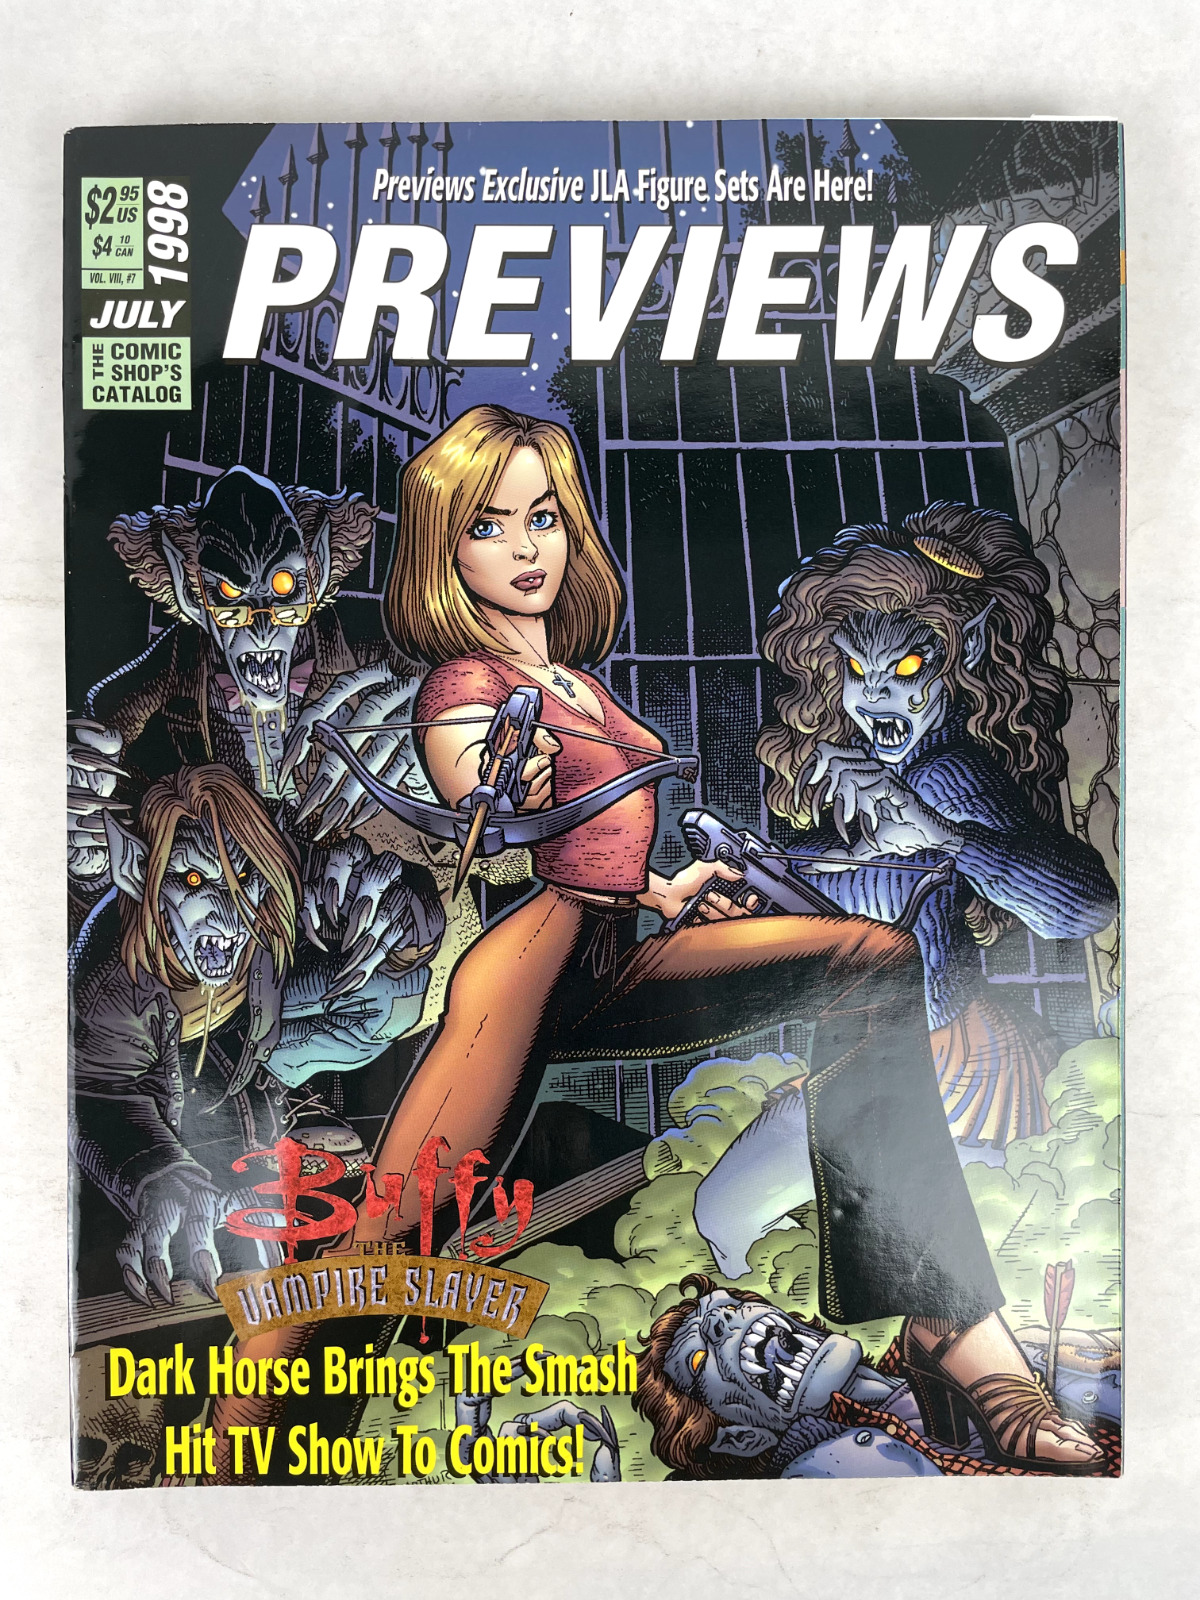 PREVIEWS July 1998 Issue BUFFY COVER (1998, Diamond Comics)